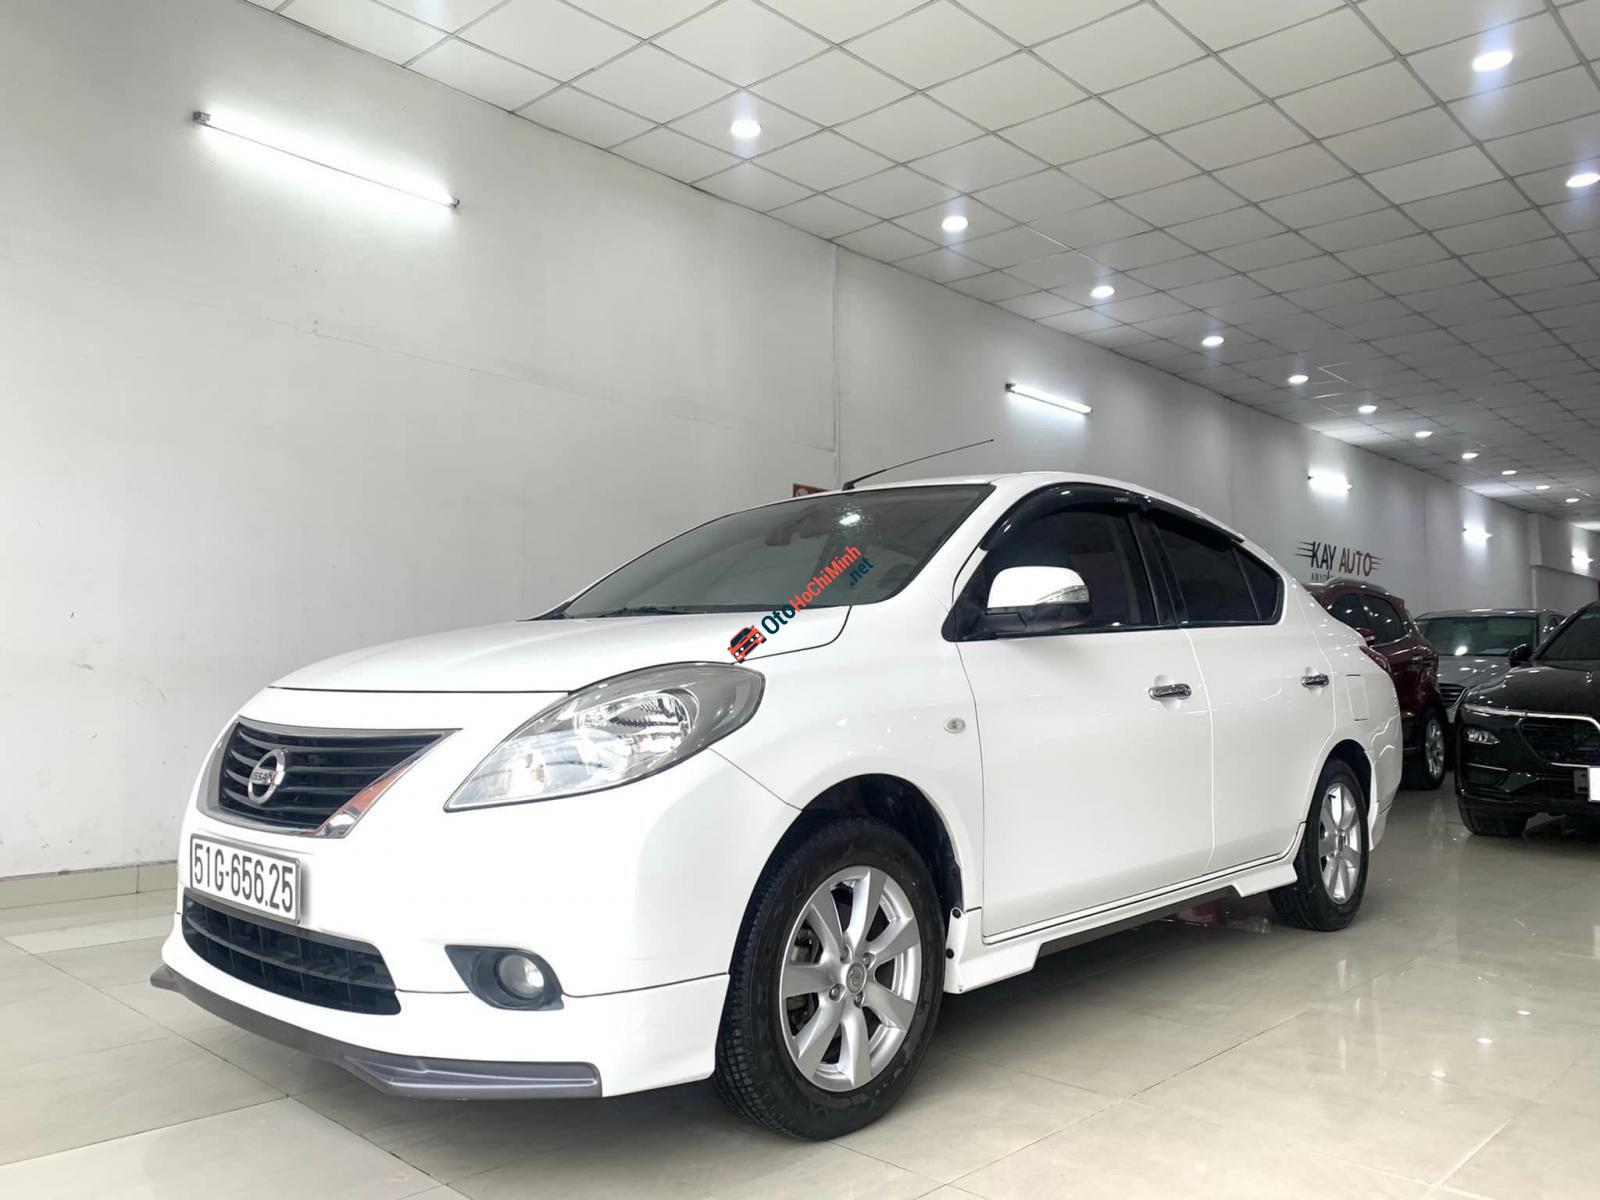 New Nissan Sunny Photos Prices And Specs in Bahrain